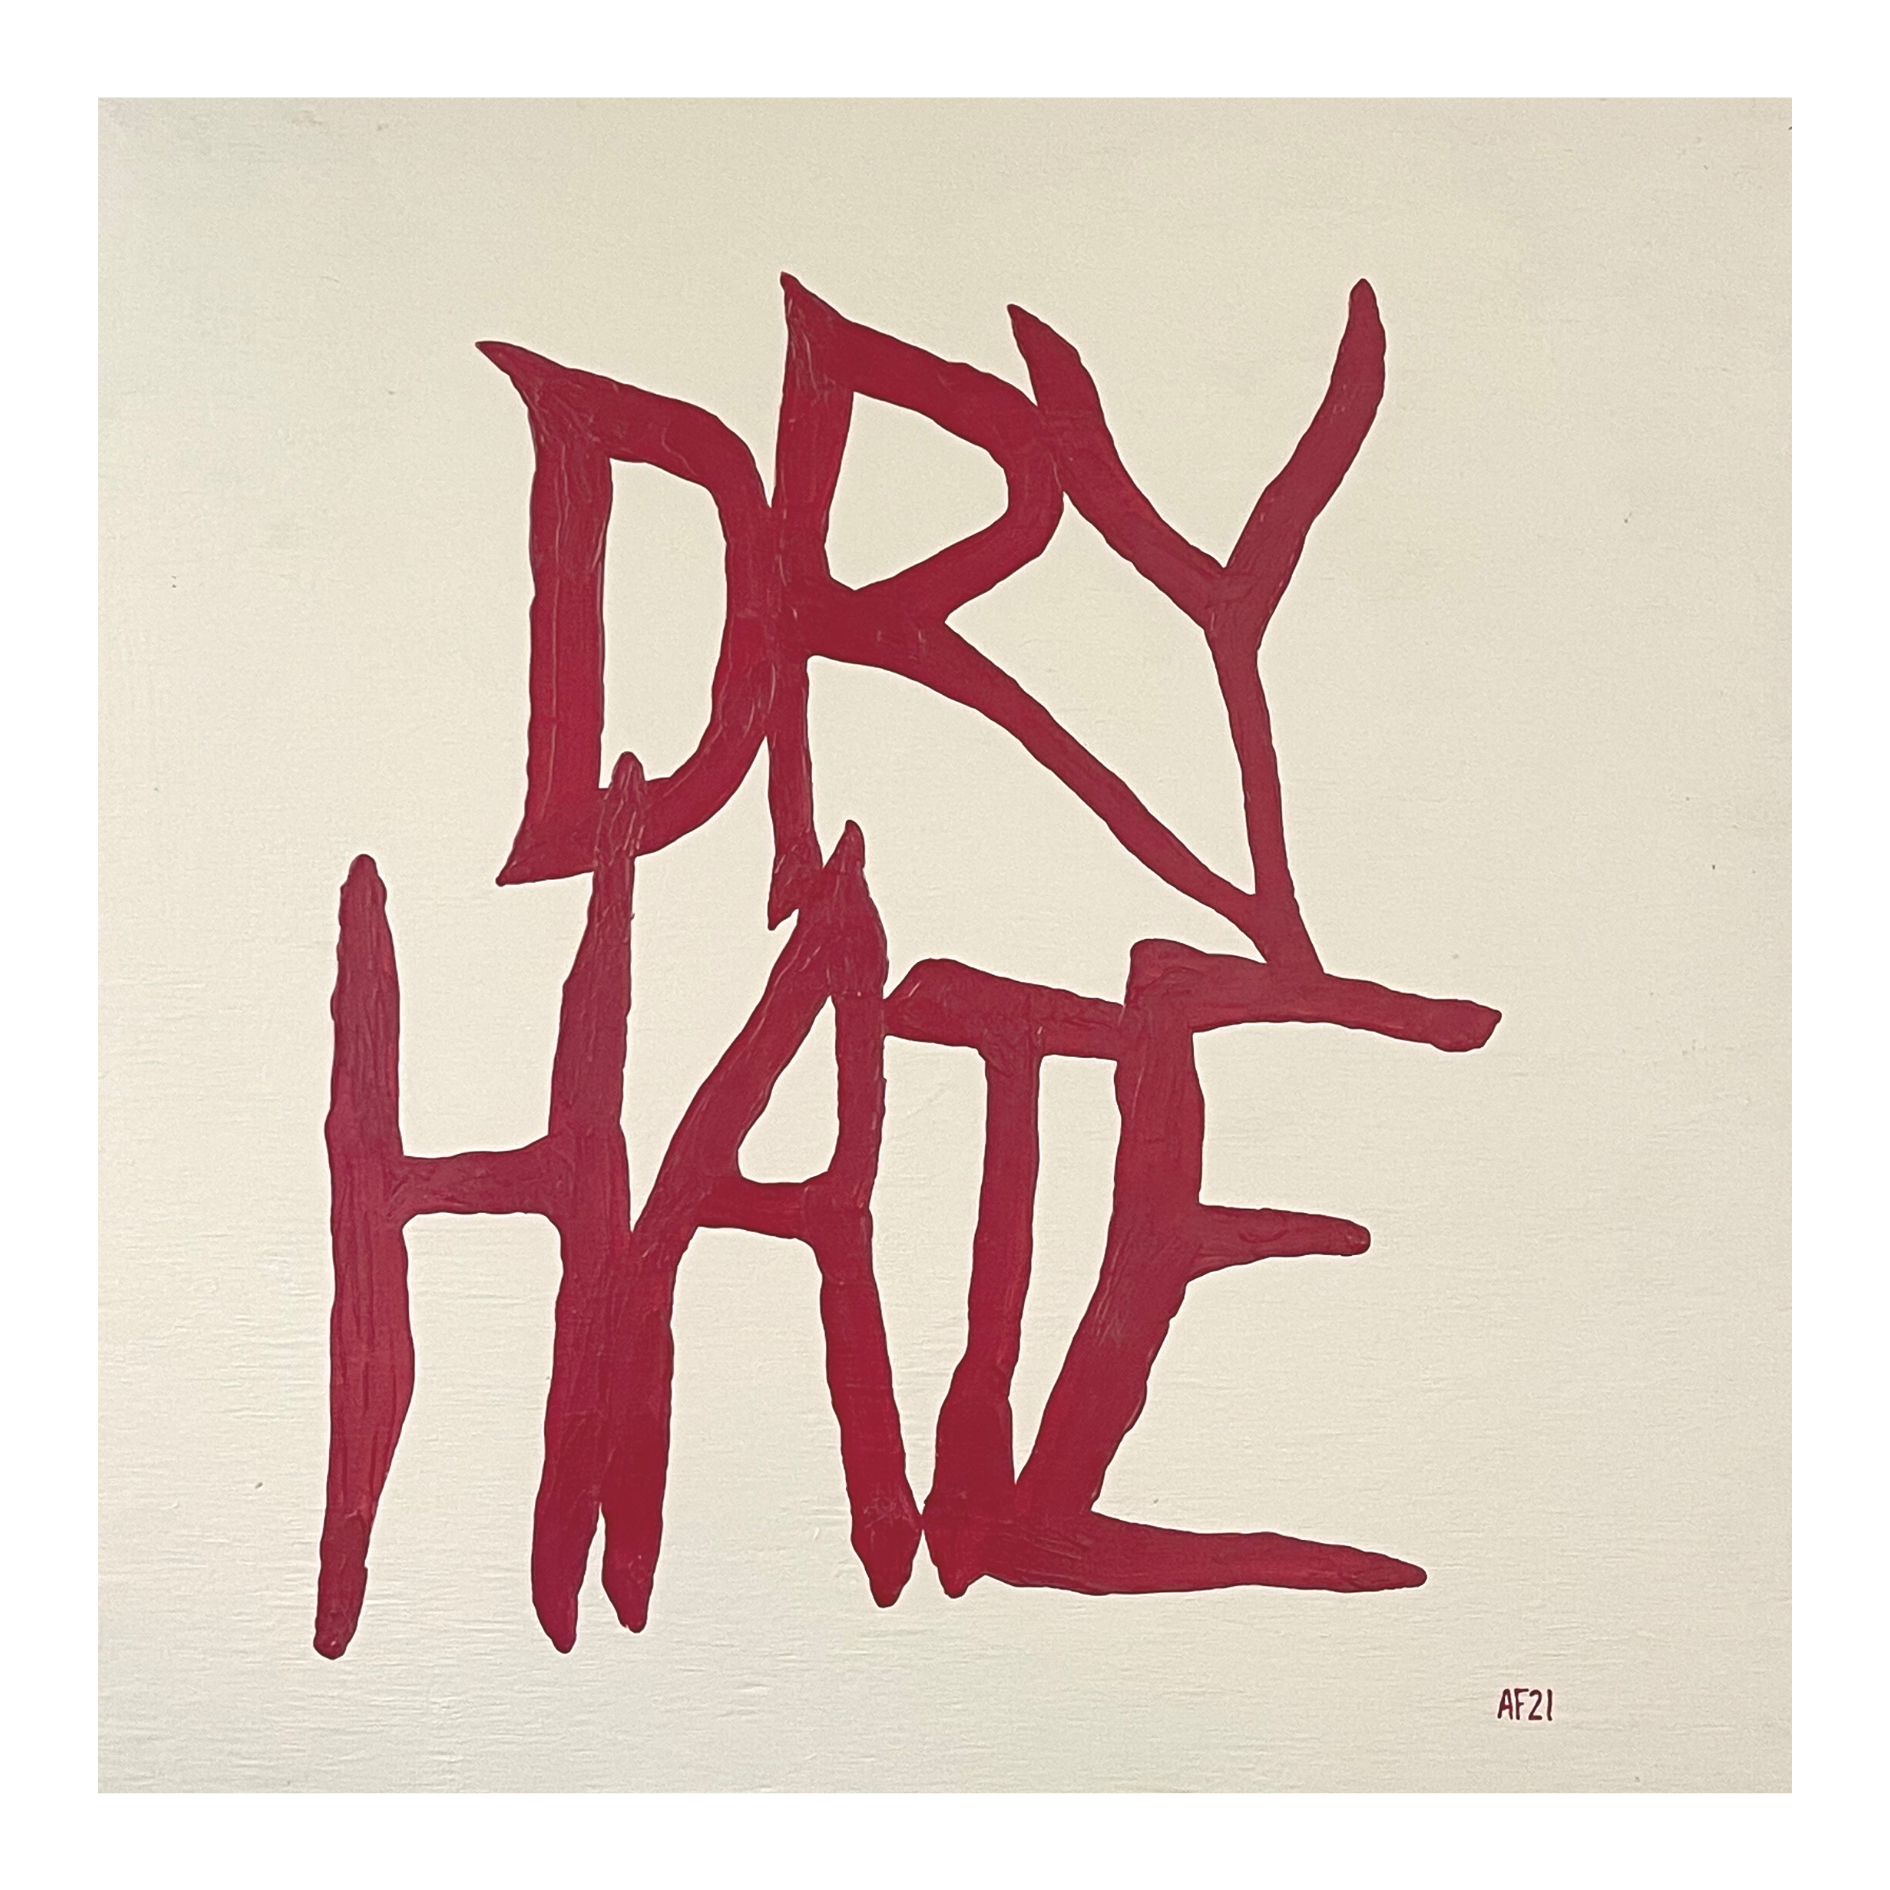 Dry Hate